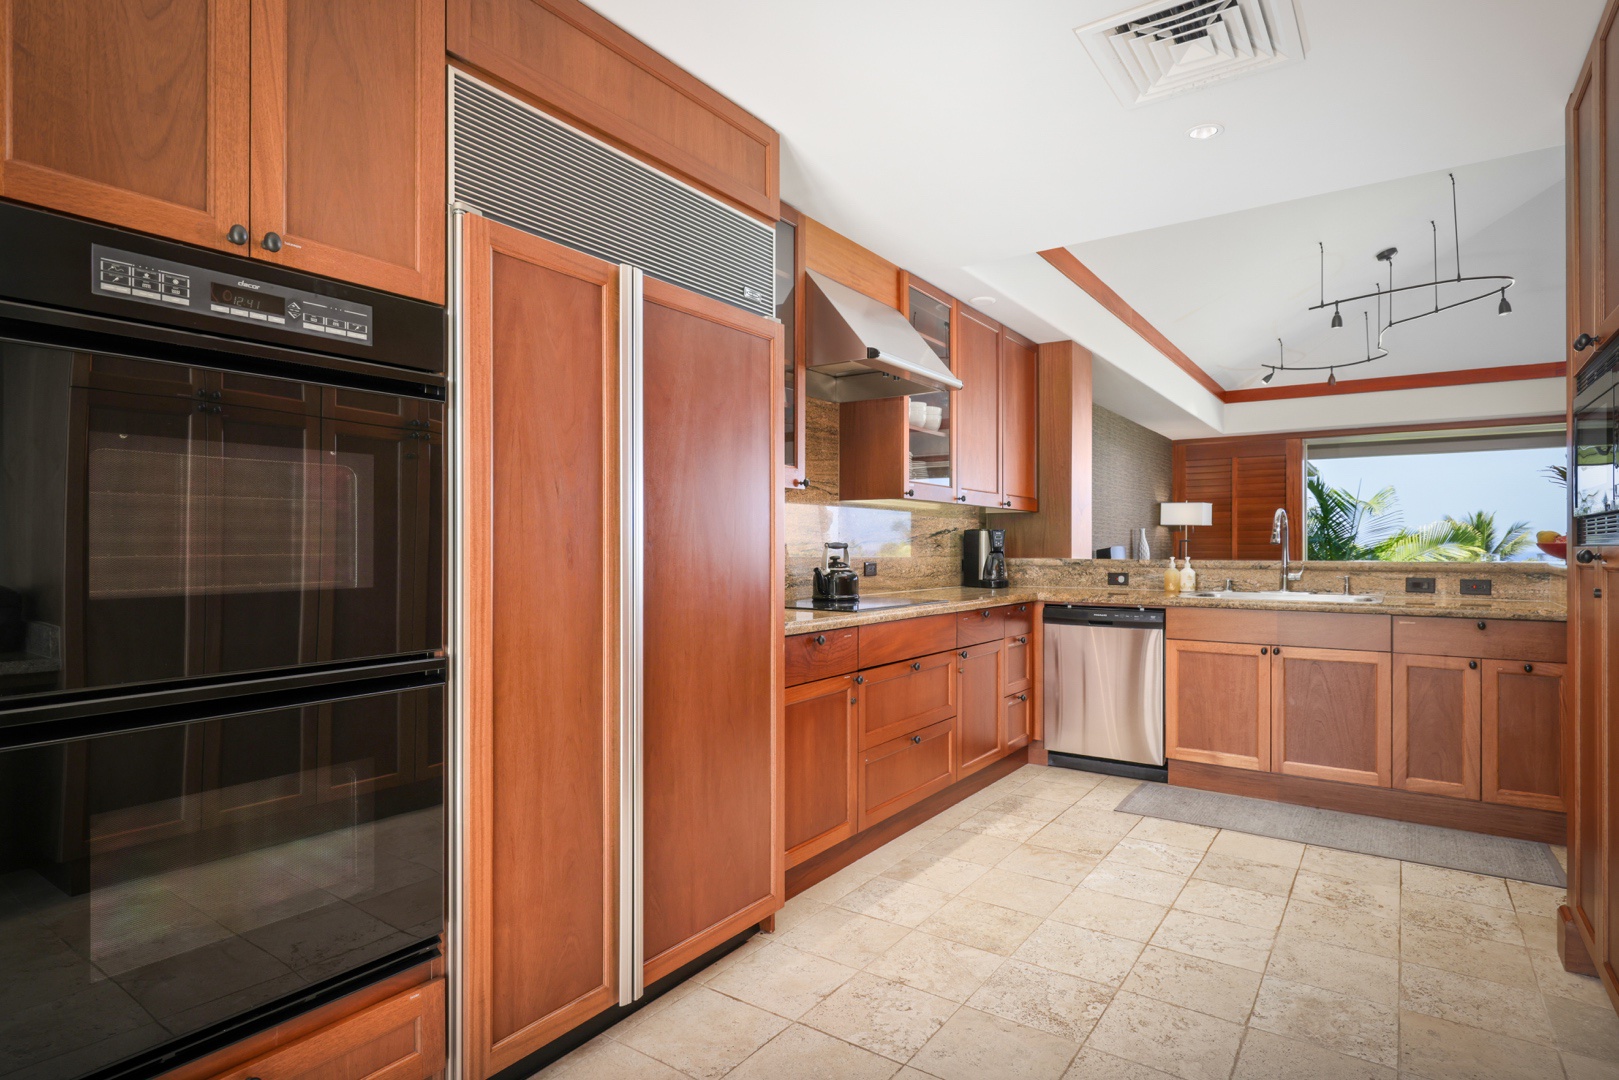 Kailua Kona Vacation Rentals, 3BD Ke Alaula Villa (210B) at Four Seasons Resort at Hualalai - Ample space to move and ample space to cook with the double oven.